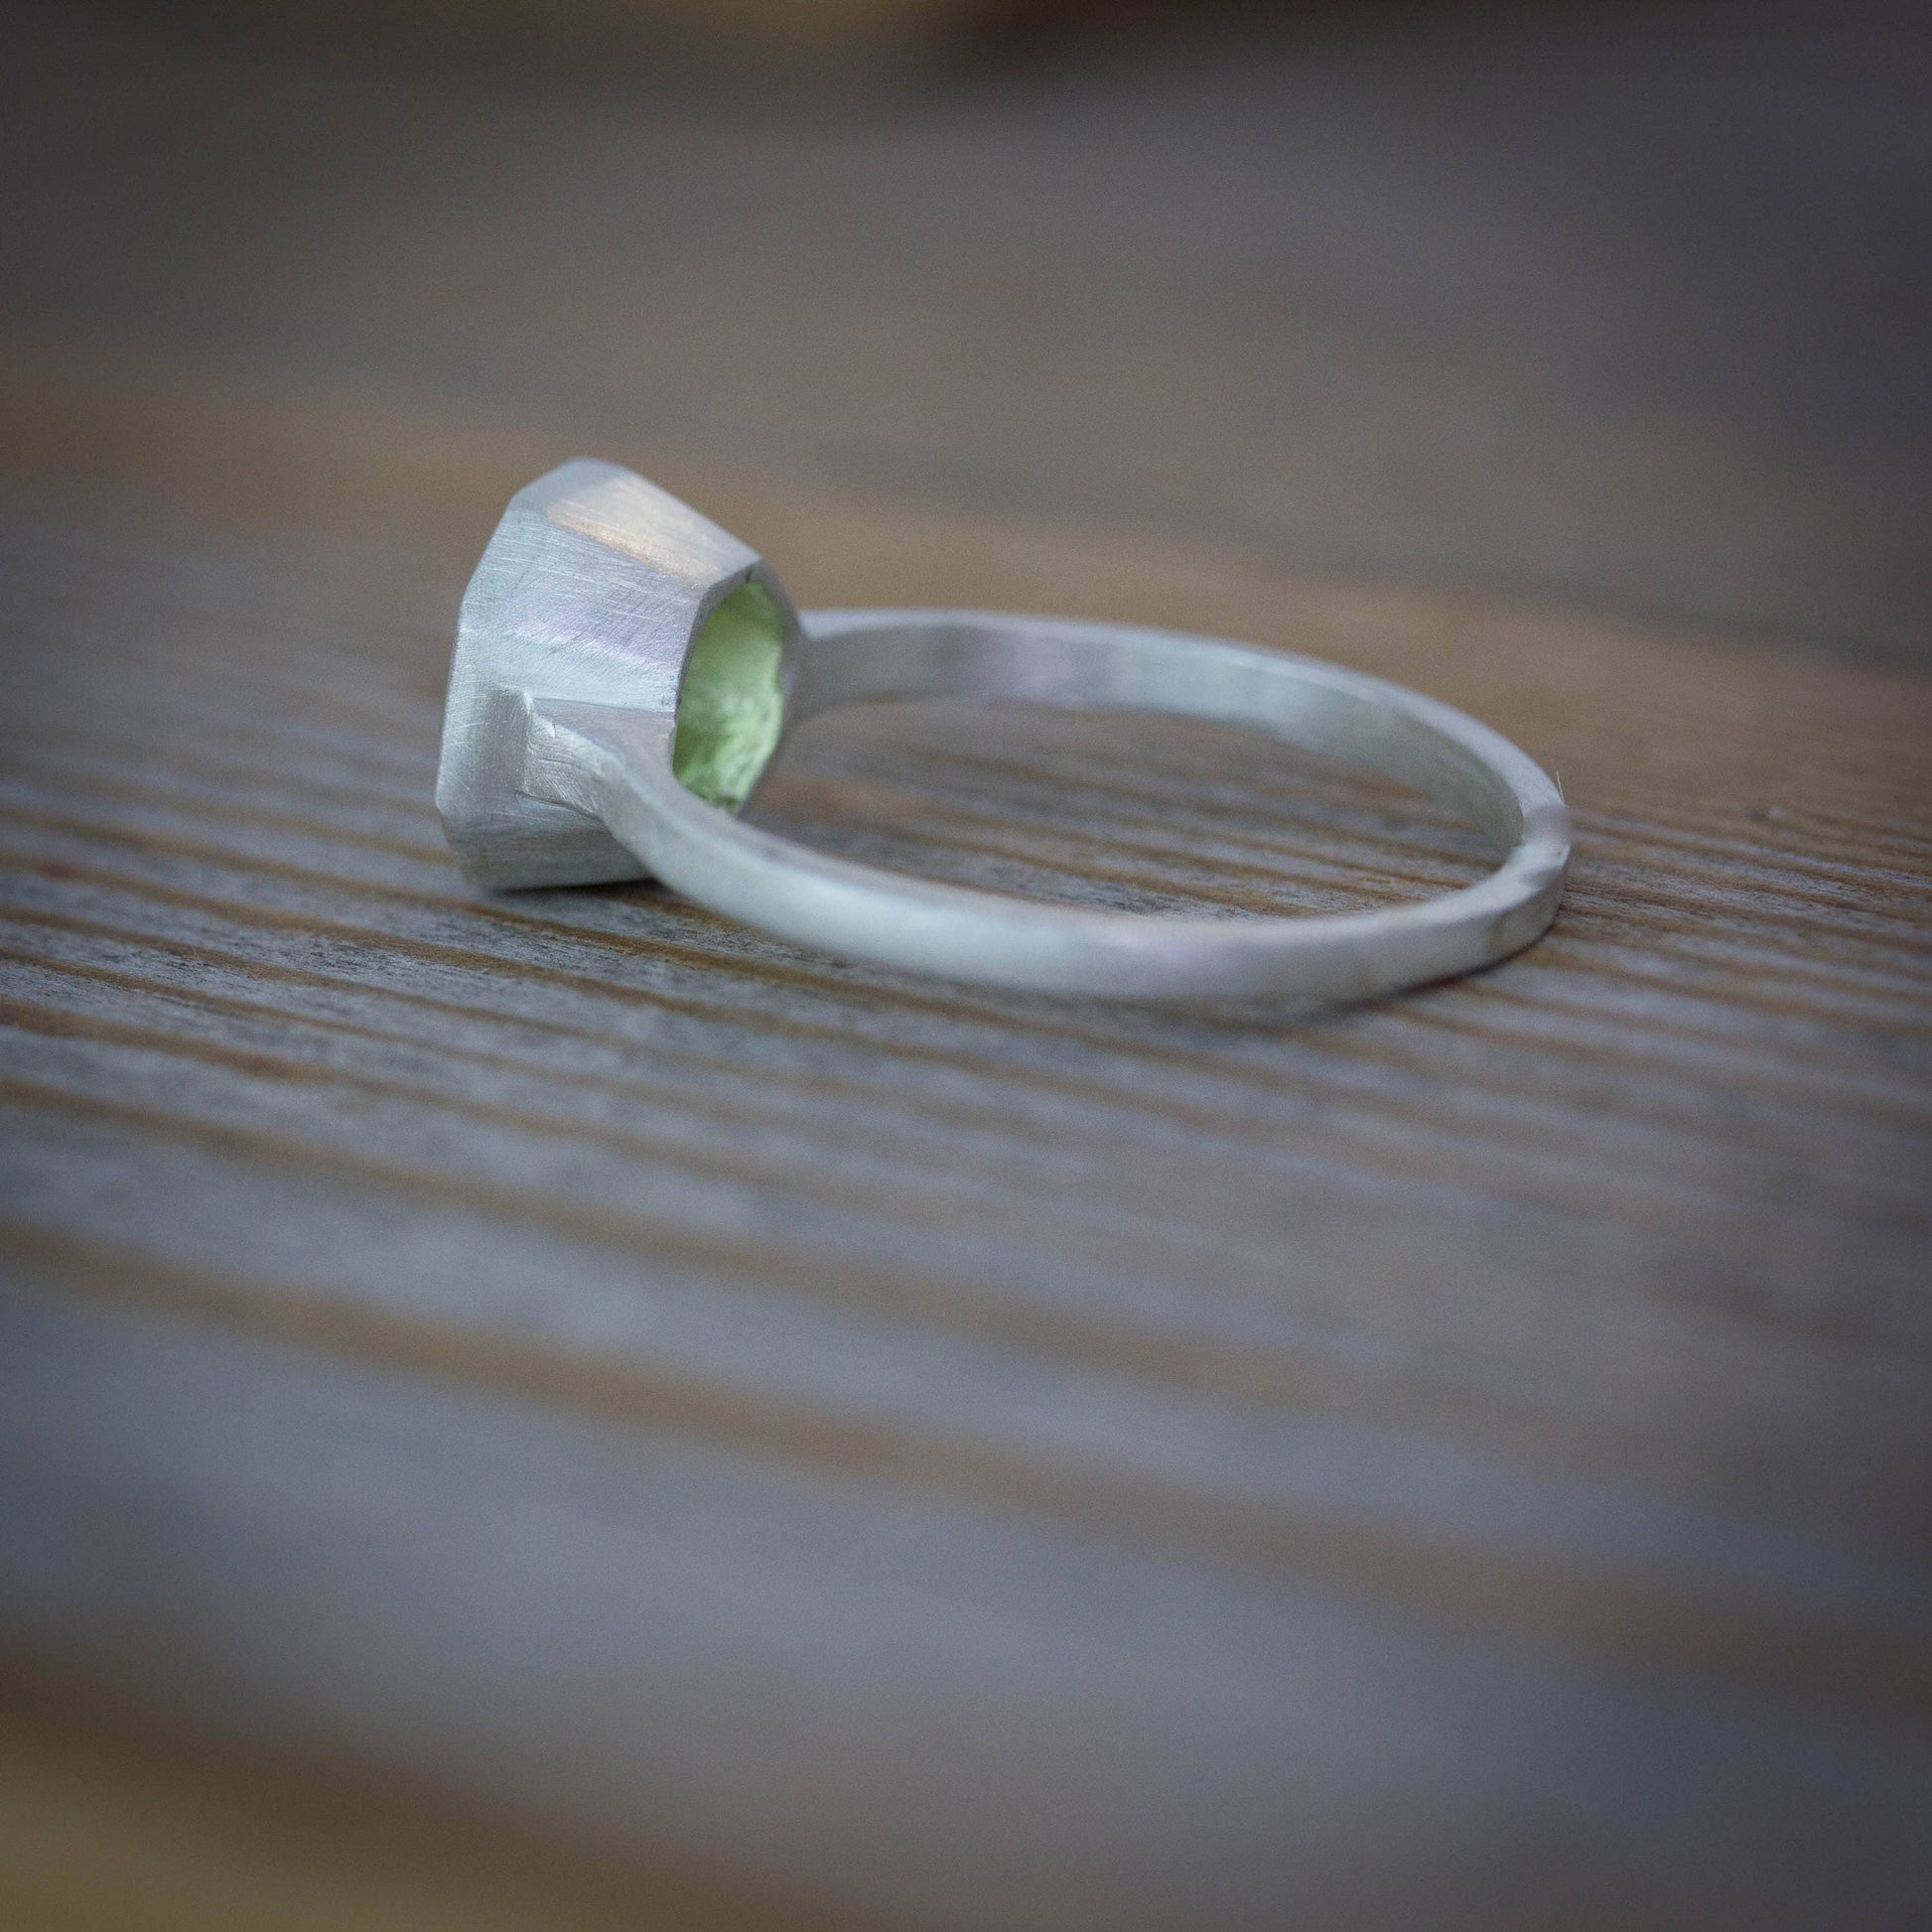 A handmade Peridot Ring in sterling silver, perfect for August birthdays.